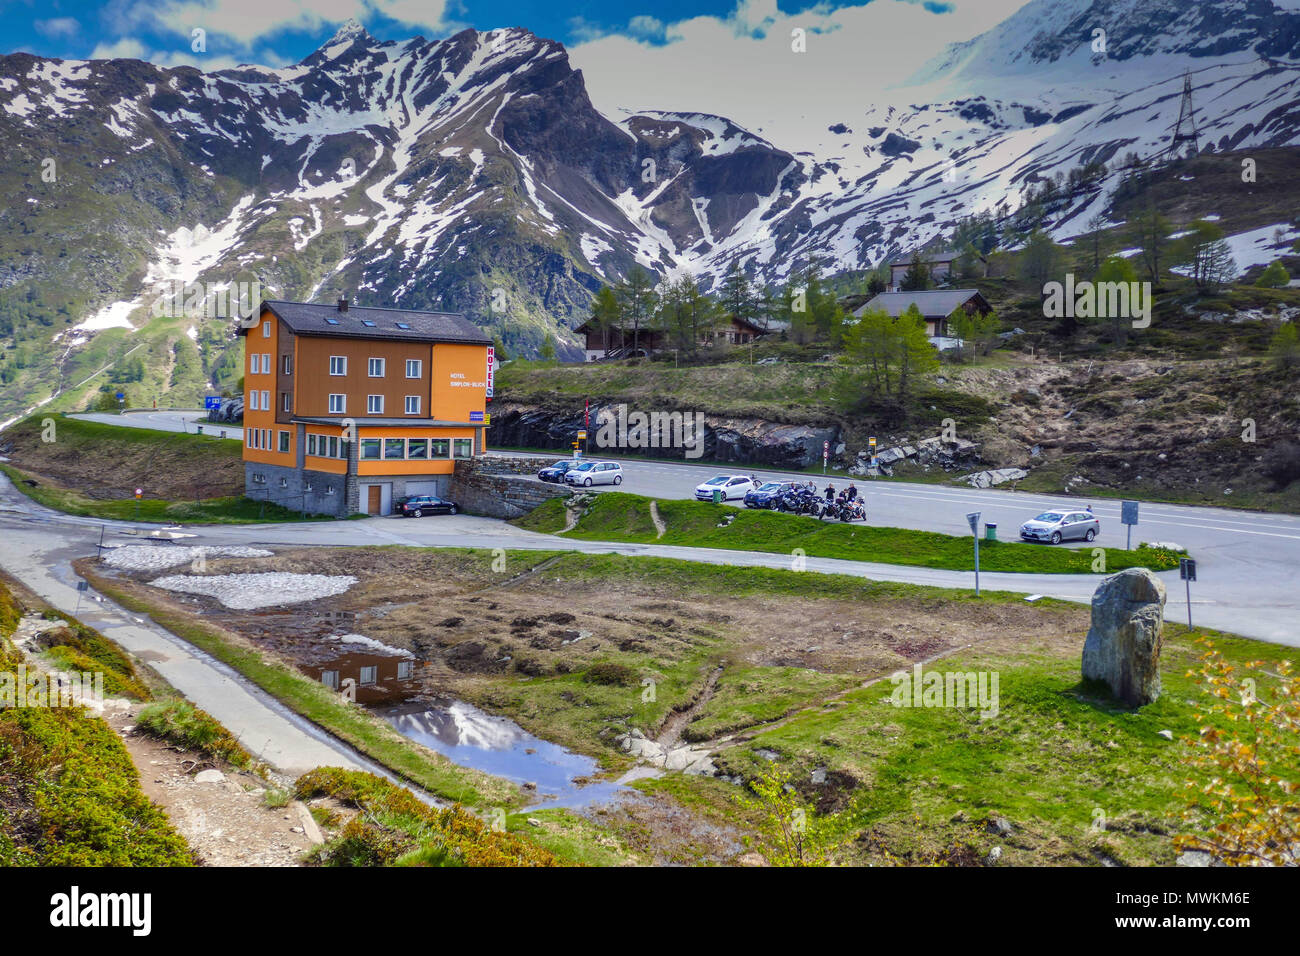 Orange hotel with parked cars and snowy weather in the mountains on the Simplon Pass, between Switzerland and Italy Stock Photo